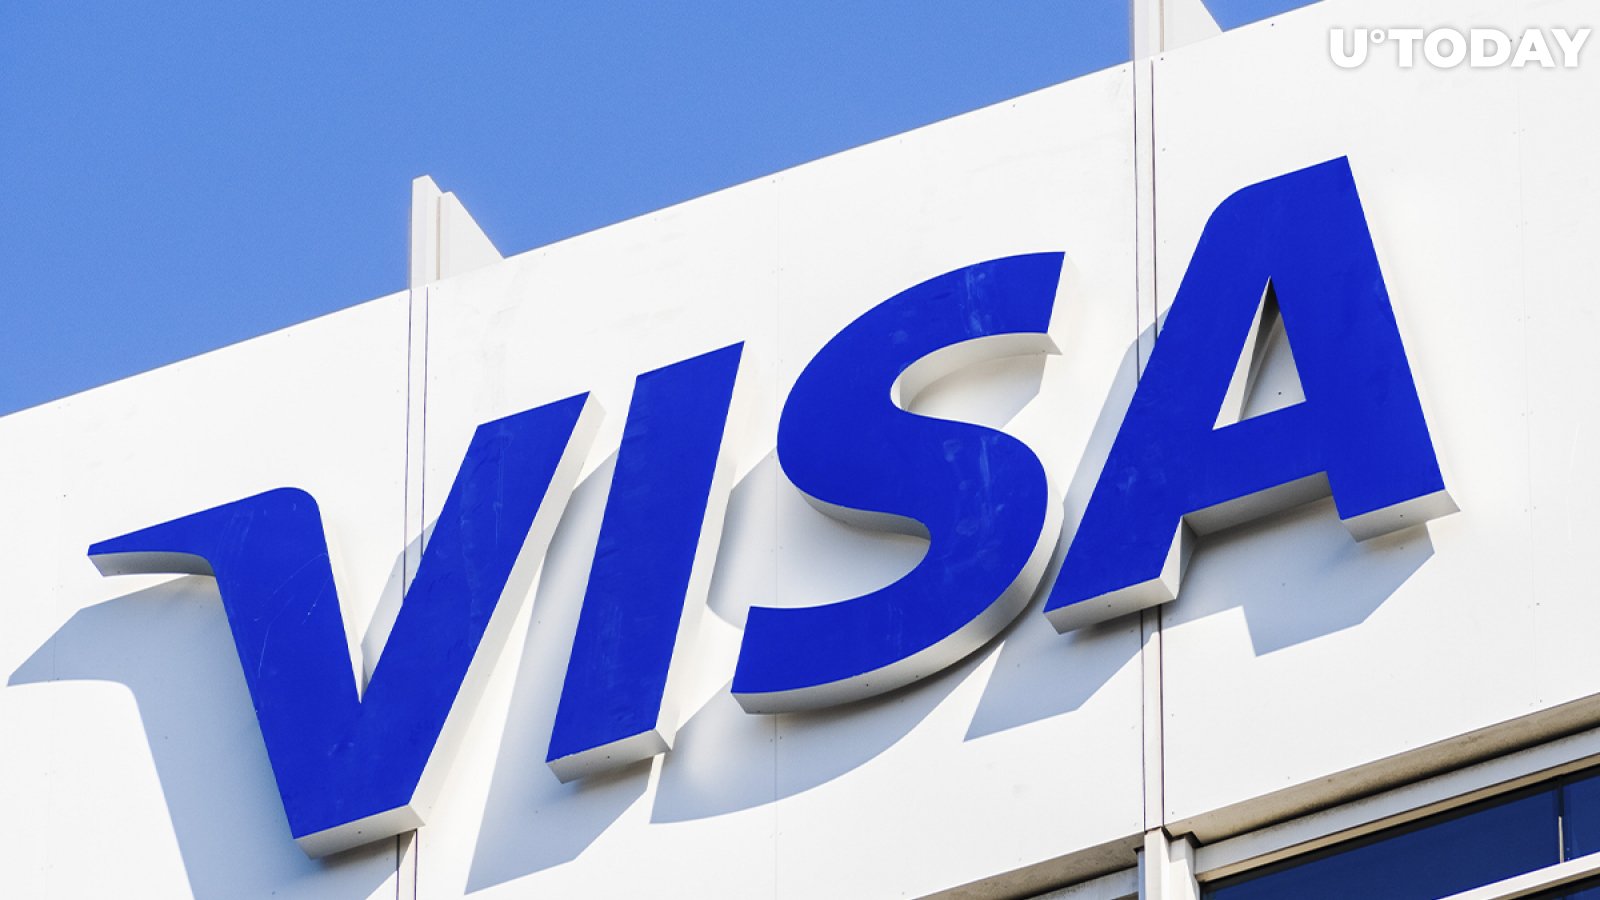 Visa "In the Middle" of Crypto, CEO Al Kelly Says